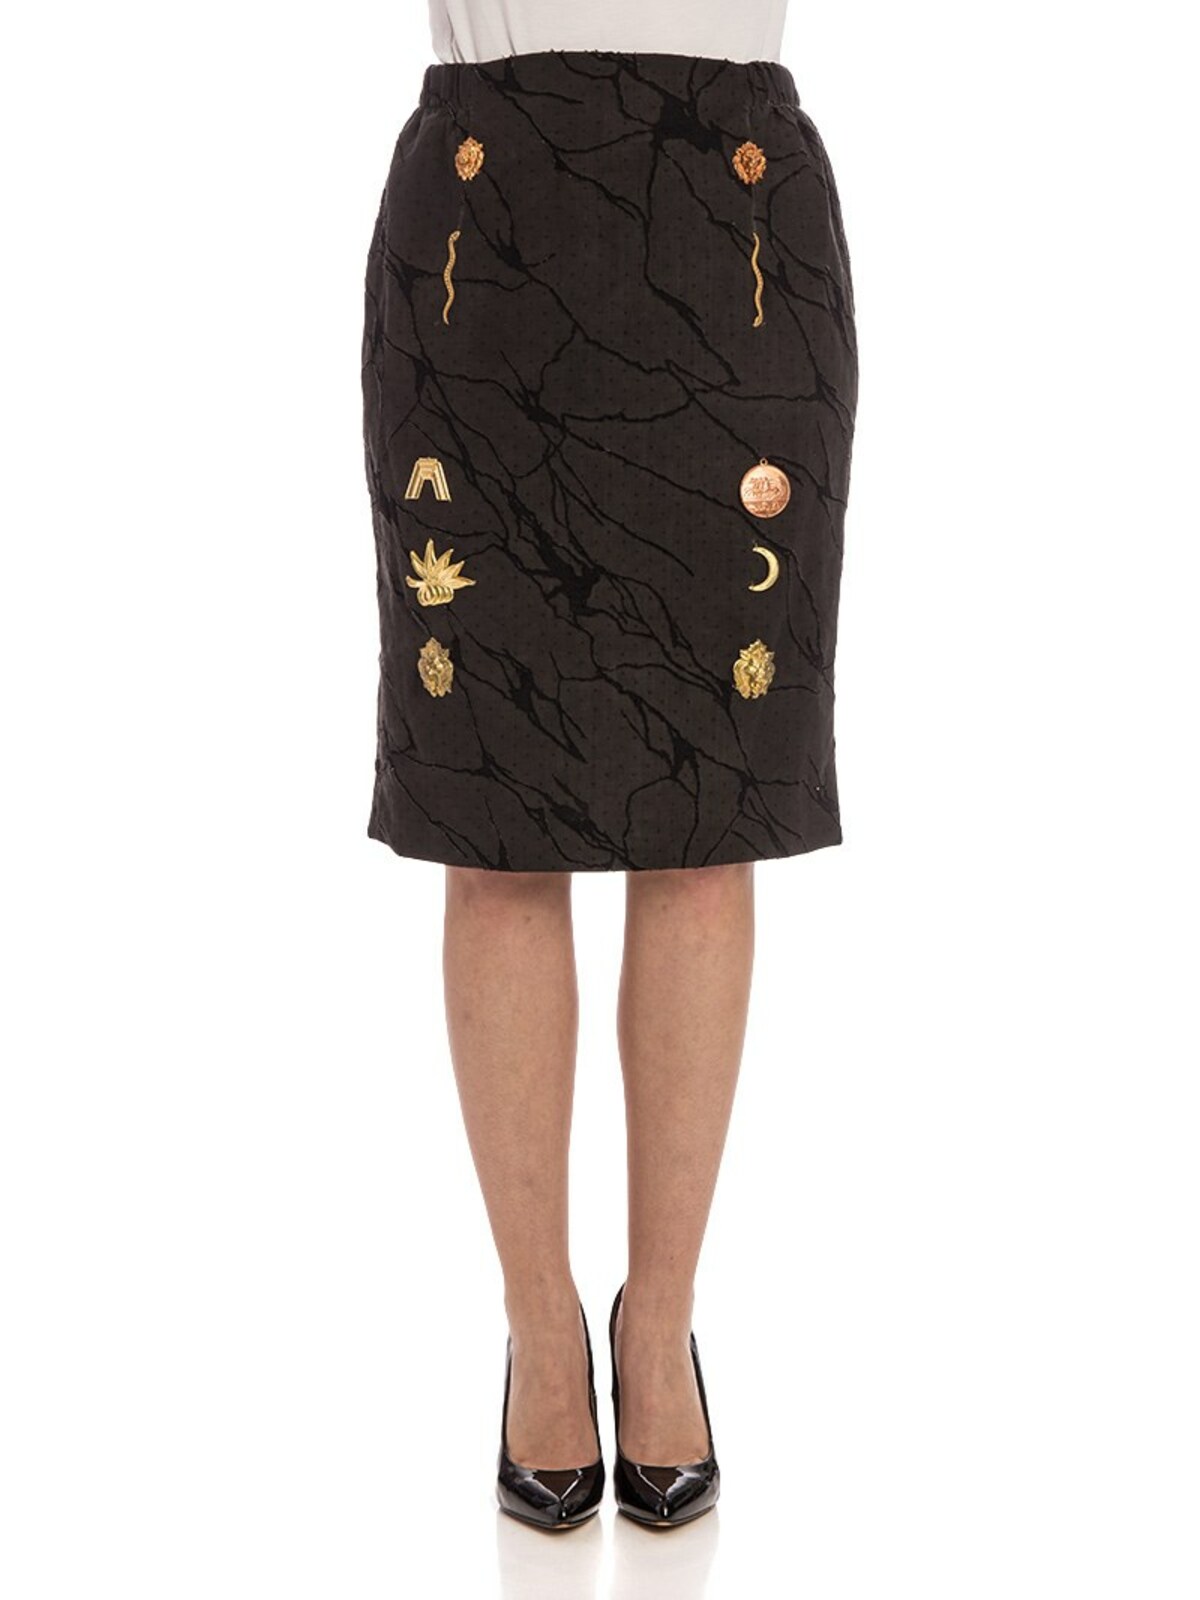 Shop Vivienne Westwood Classic Pencil Skirt (andreas Kronthaler For In Negro